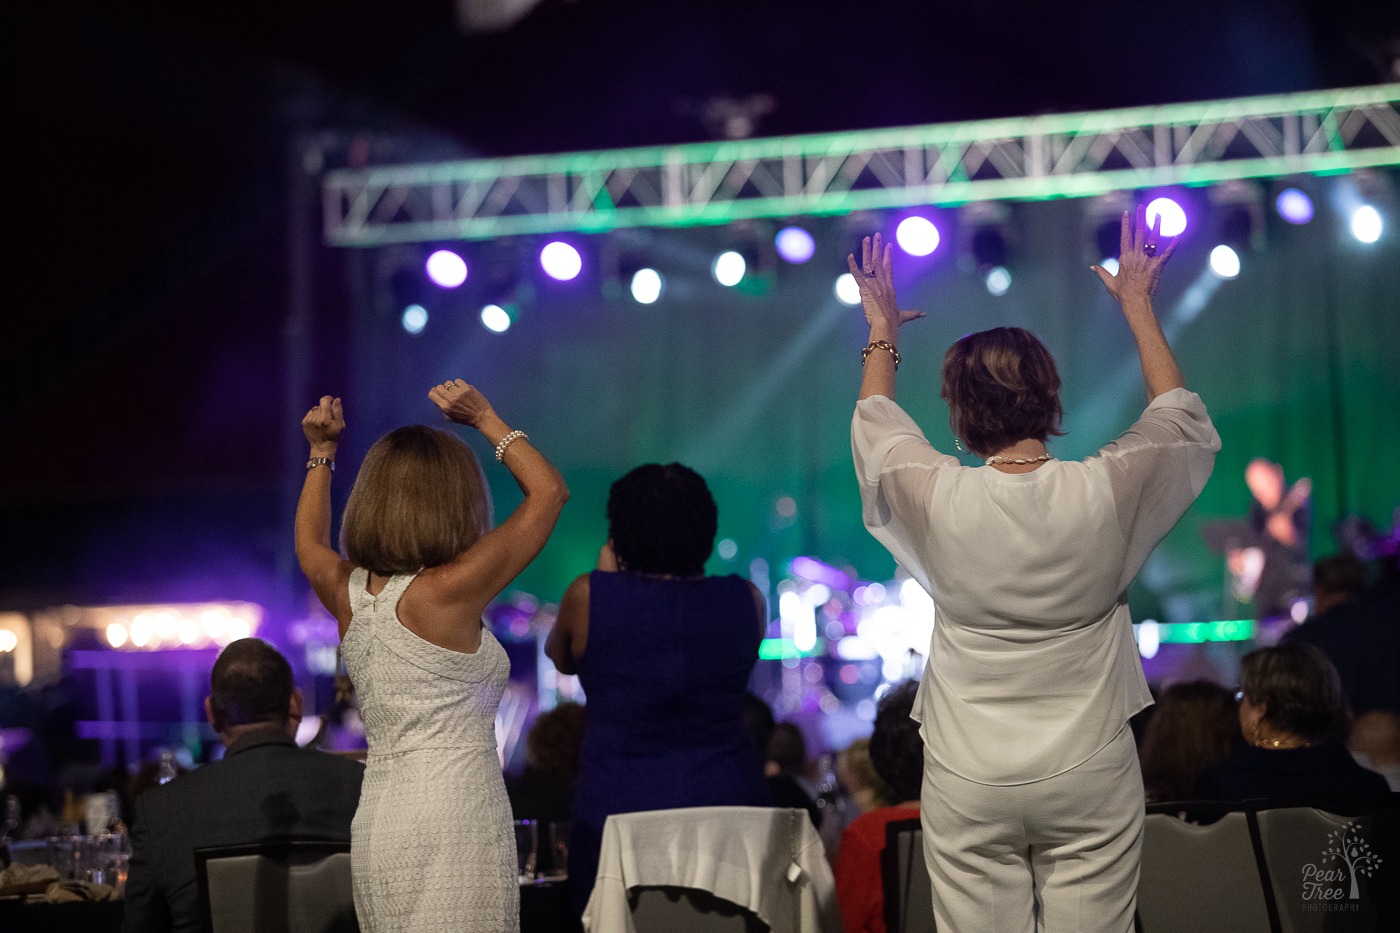 Covenant House Georgia supporters dancing with arms stretched over their heads. During Night of Broadway Stars performance at Atlanta Mercedes Benz stadium